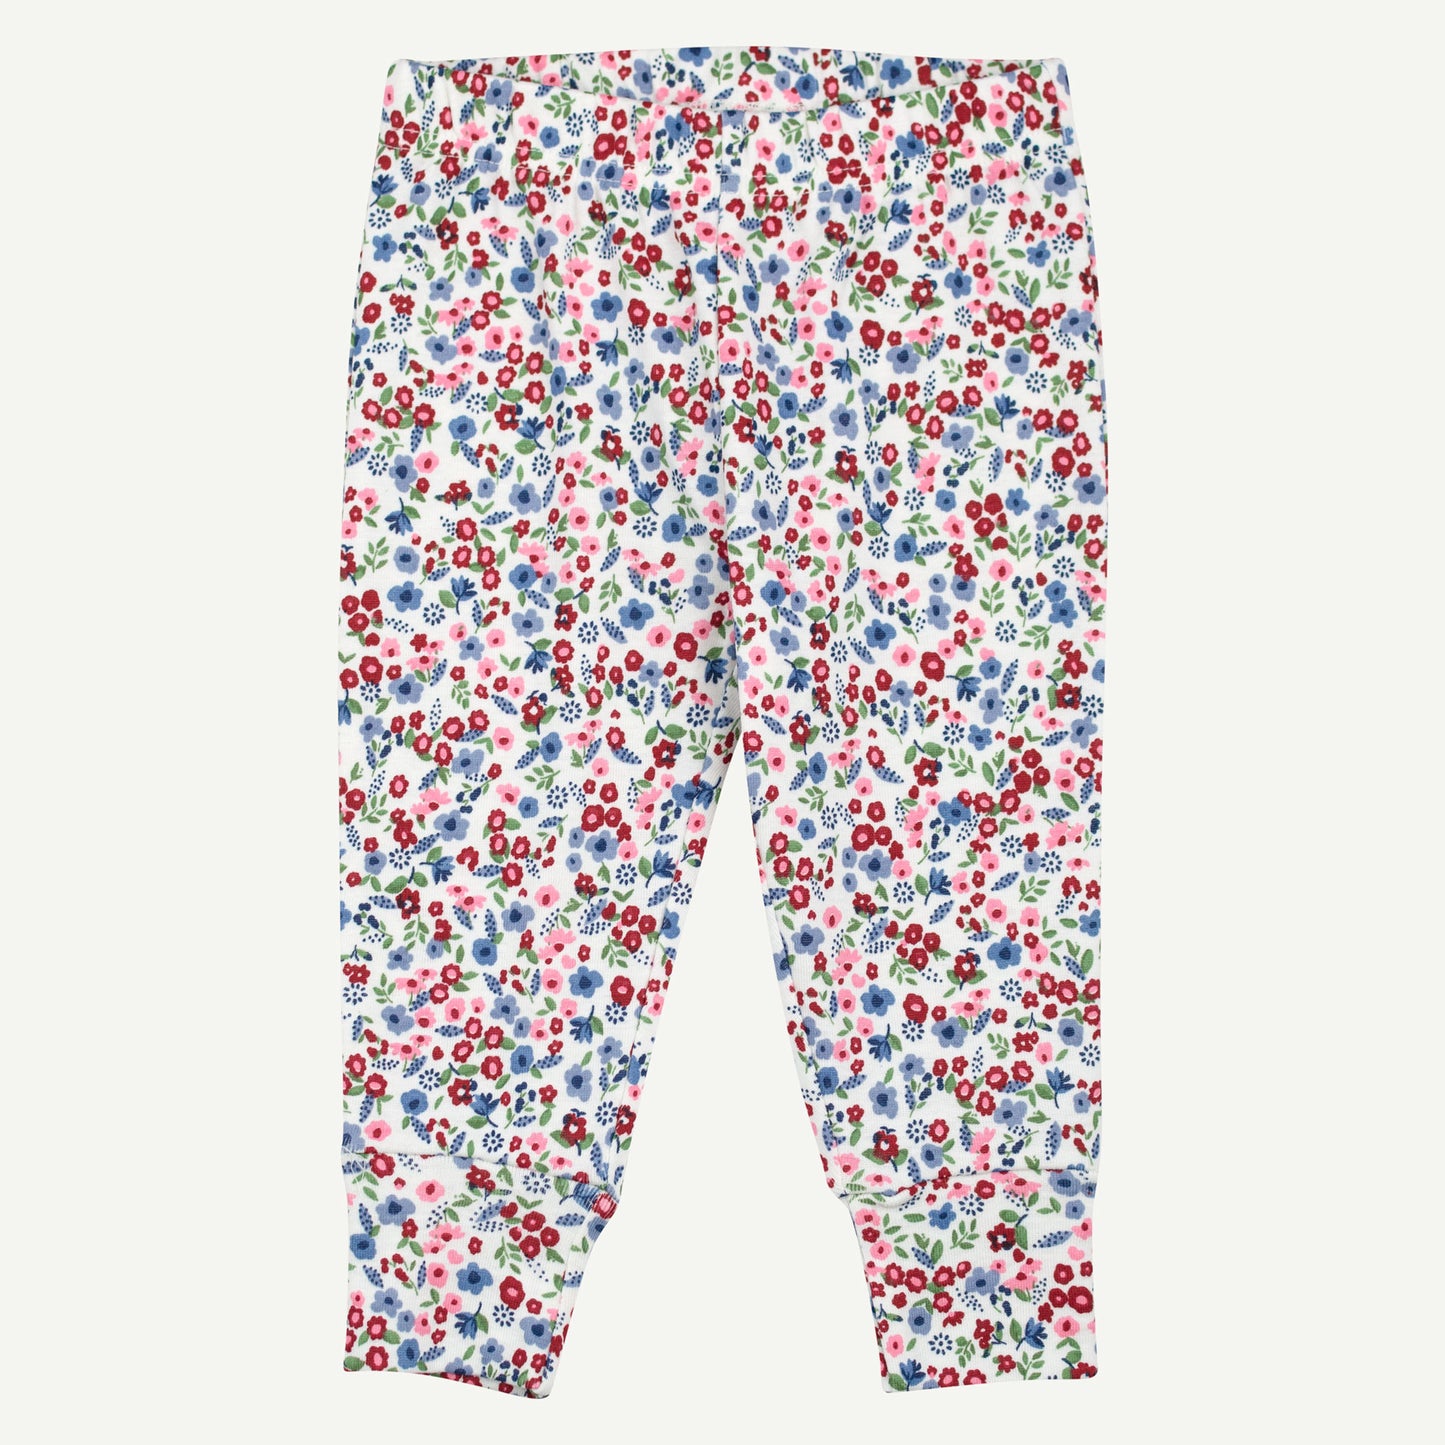 2-Piece Pajama in Ditsy Floral Print - Toddler